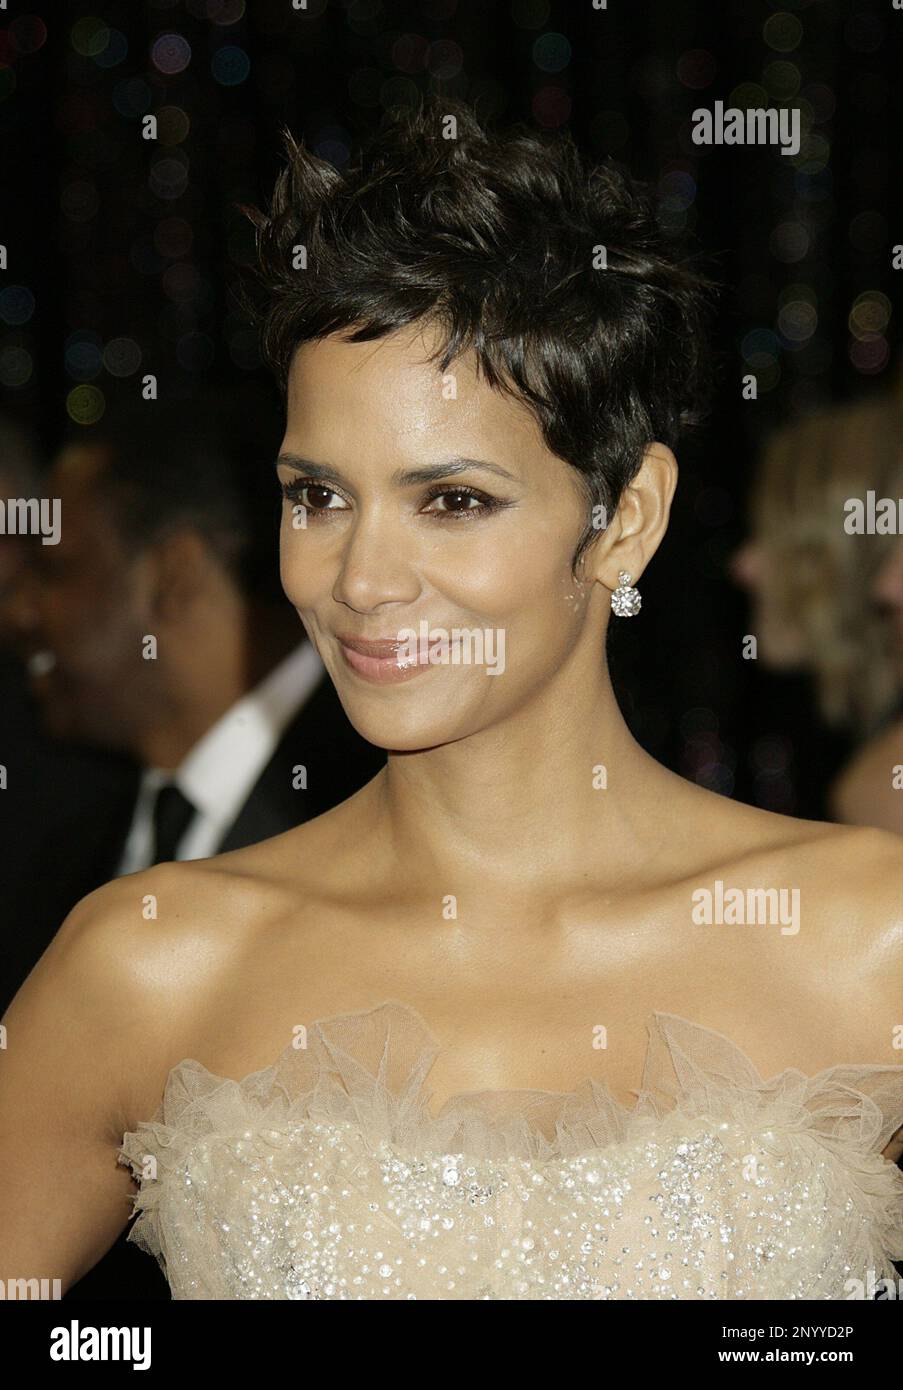 Actress Halle Berry arrives at the 83rd Annual Academy Awards held at the Kodak Theatre on February 27, 2011 in Los Angeles, California. Photo by Francis Specker Stock Photo